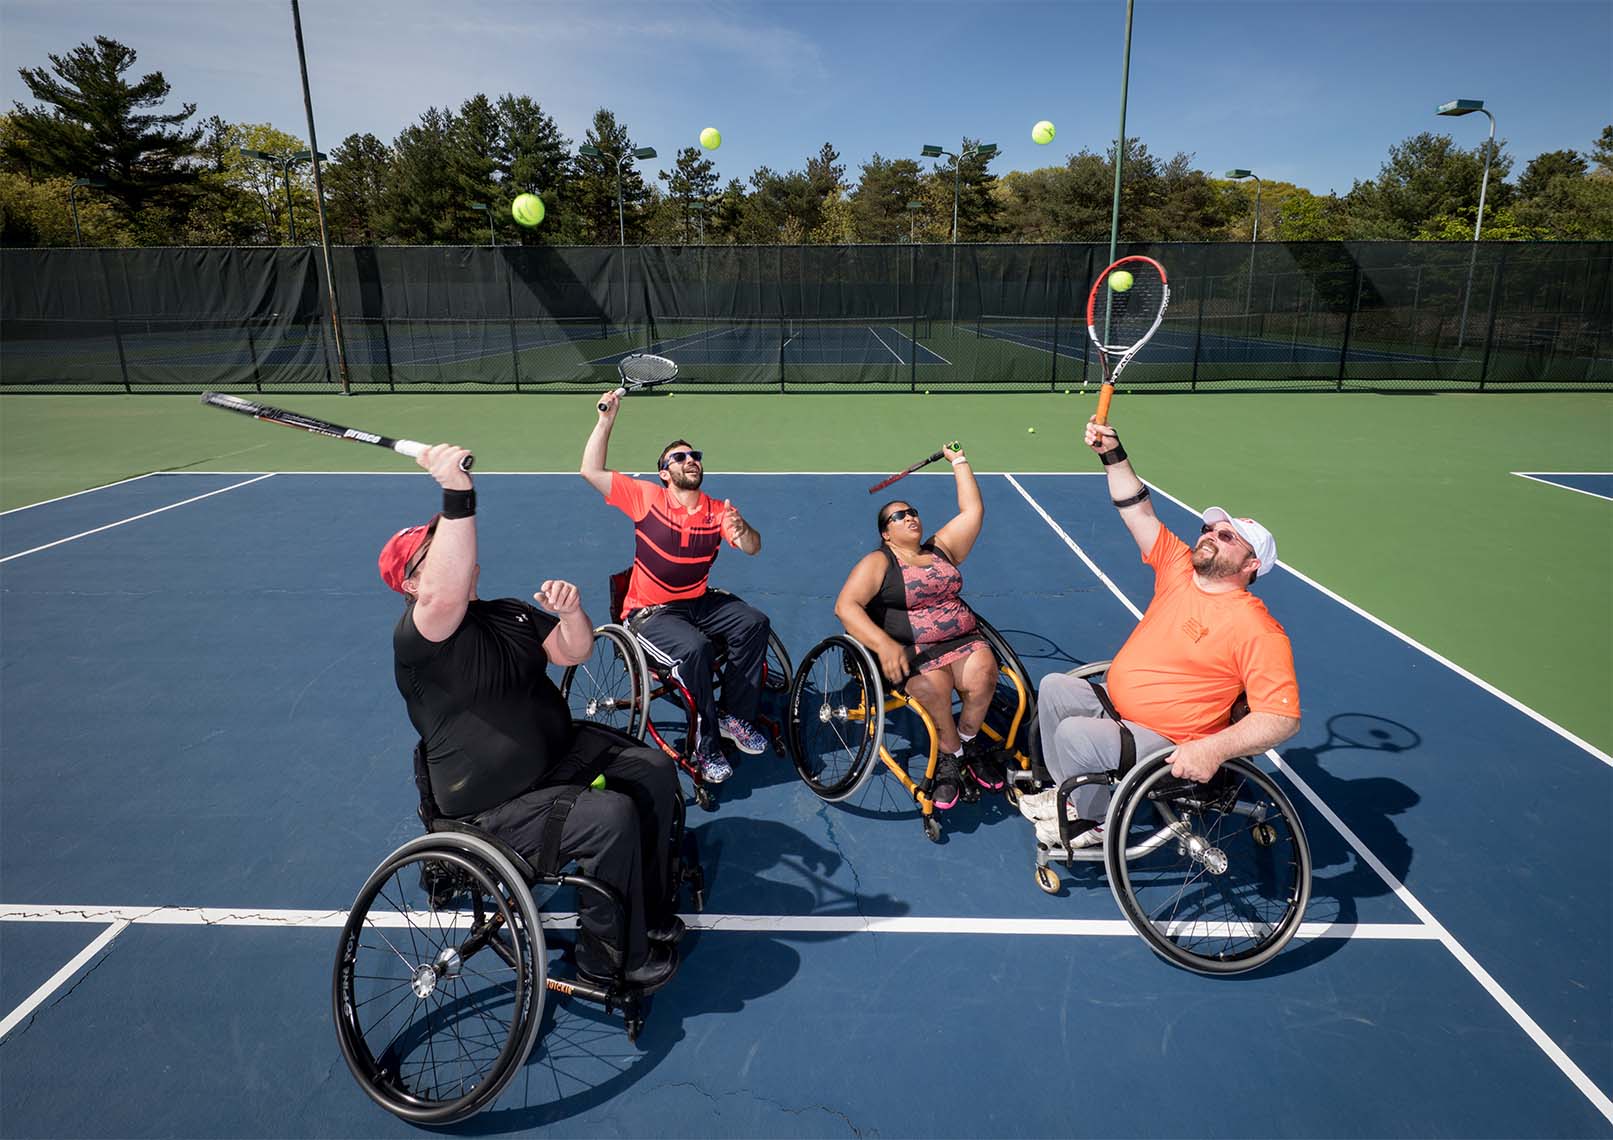 Marketing photo of adaptive sports tennis players for USTANE